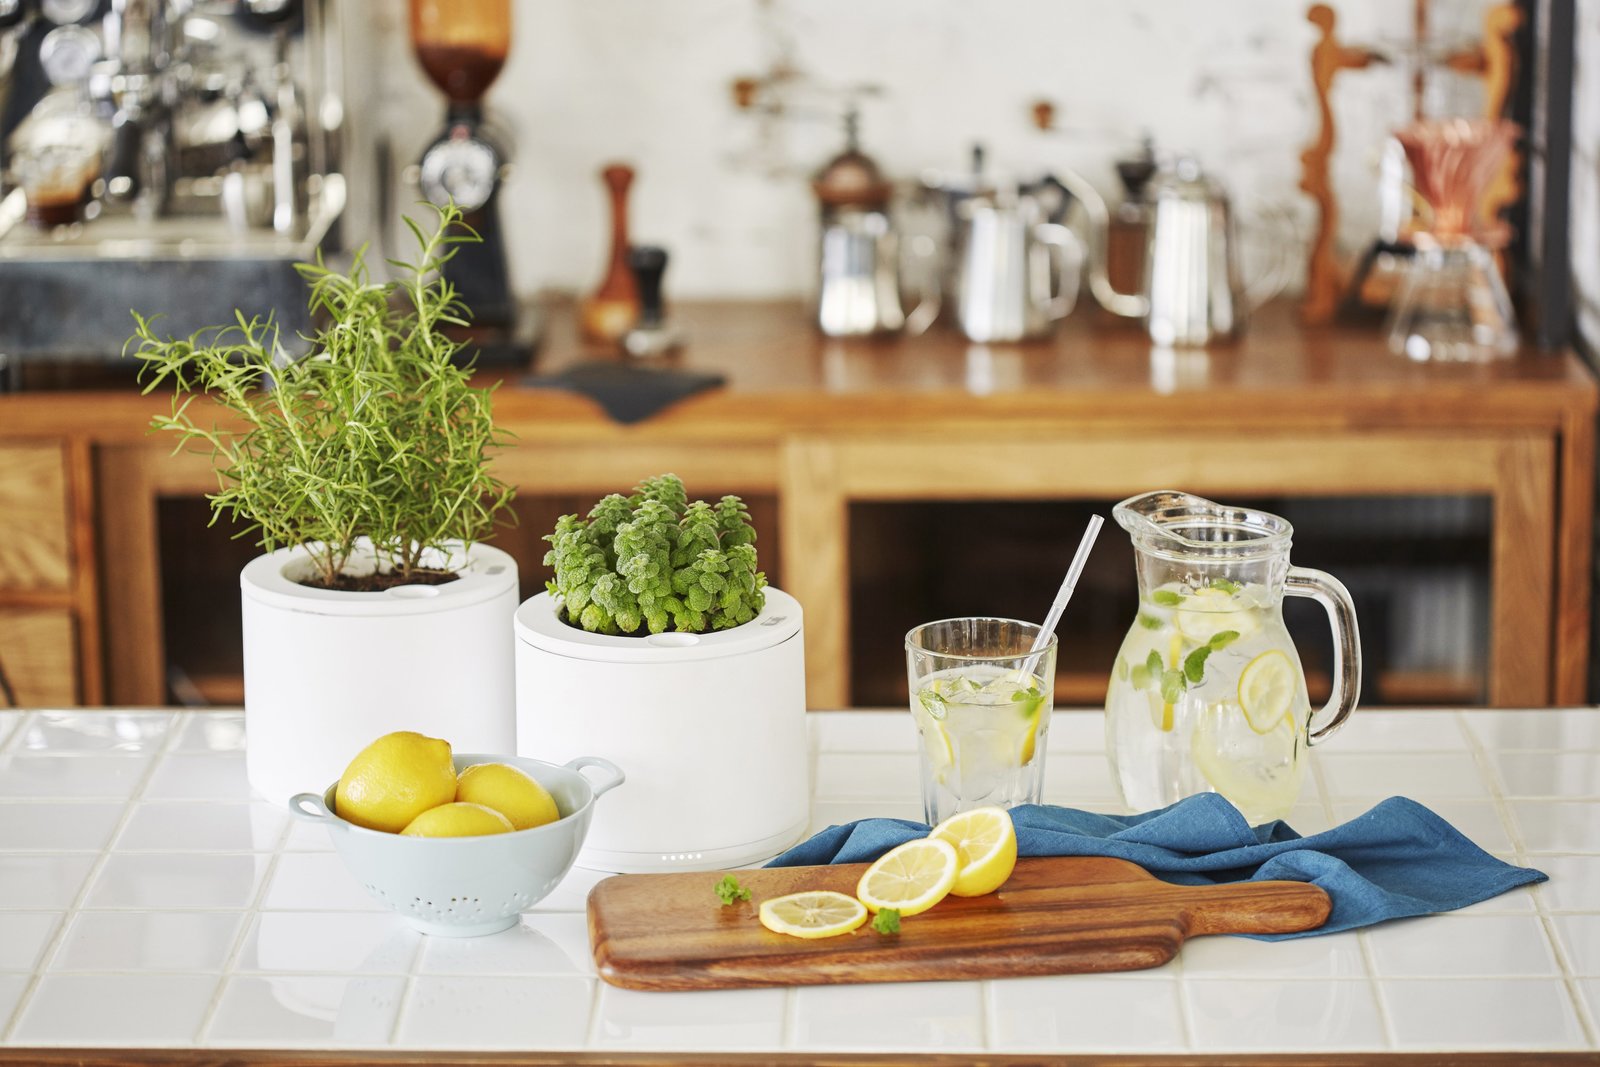 Clueless About Gardening? These 5 Smart Planters Can Help